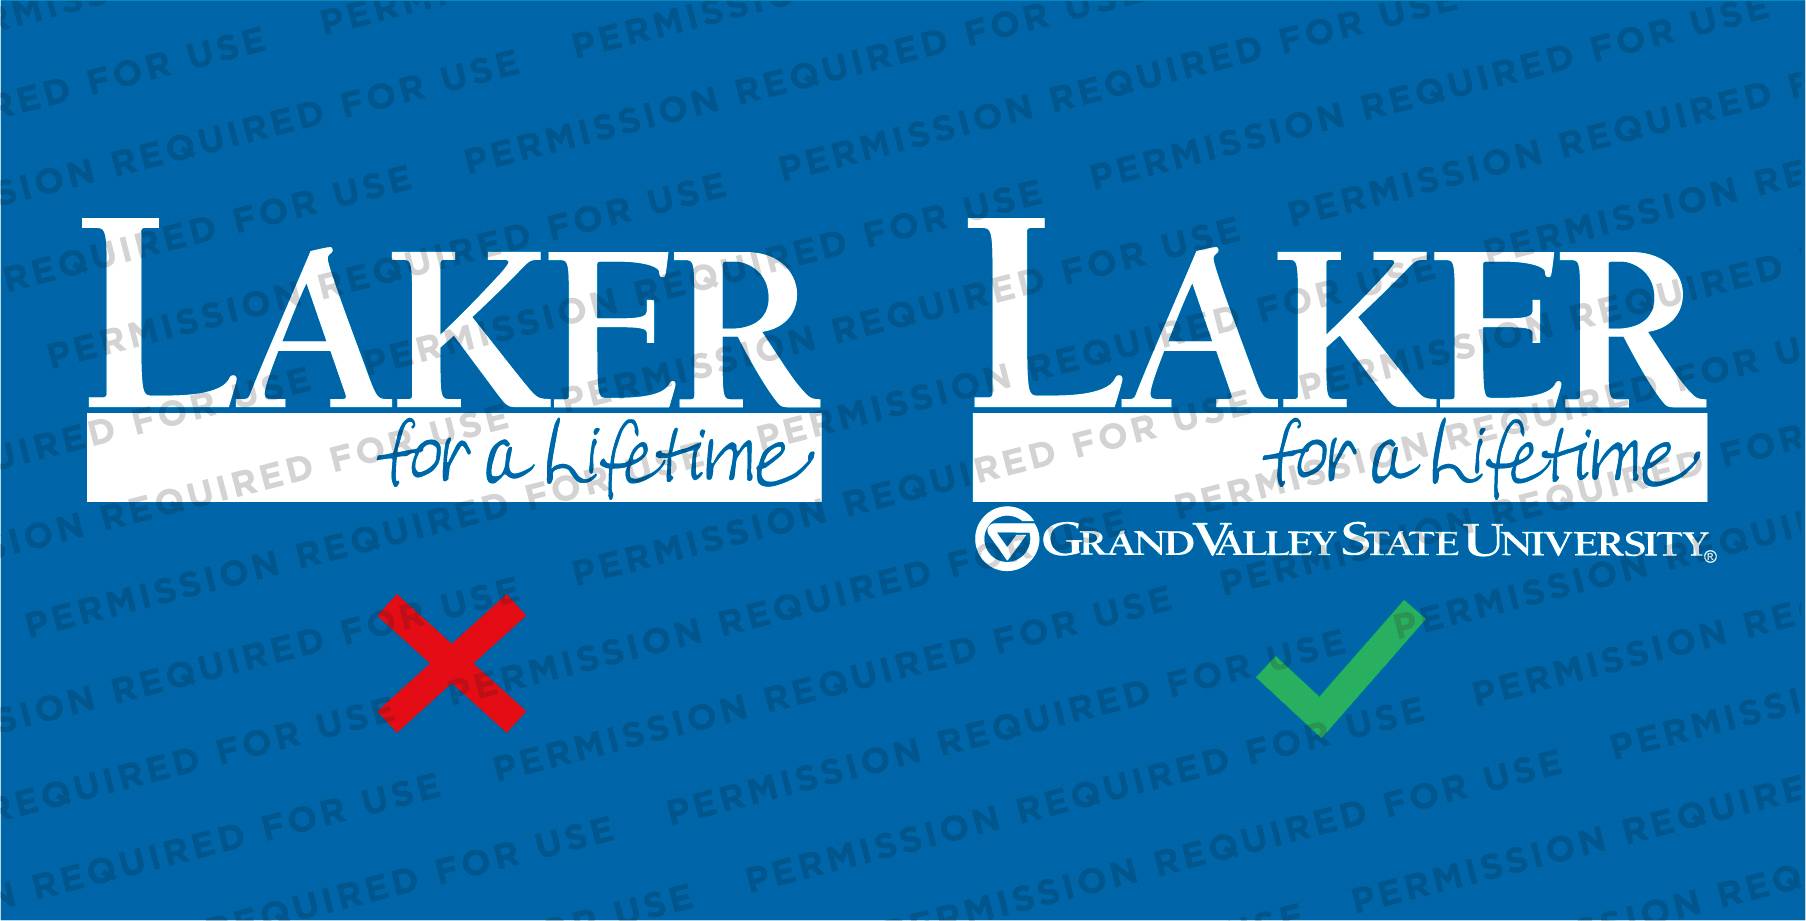 2 Laker for a Lifetime text treatments. The one on the left is missing the single-line Grand Valley logo beneath it. A red "X" is on it. The one on the right includes the single-line Grand Vally logo. A green checkmark is on it.